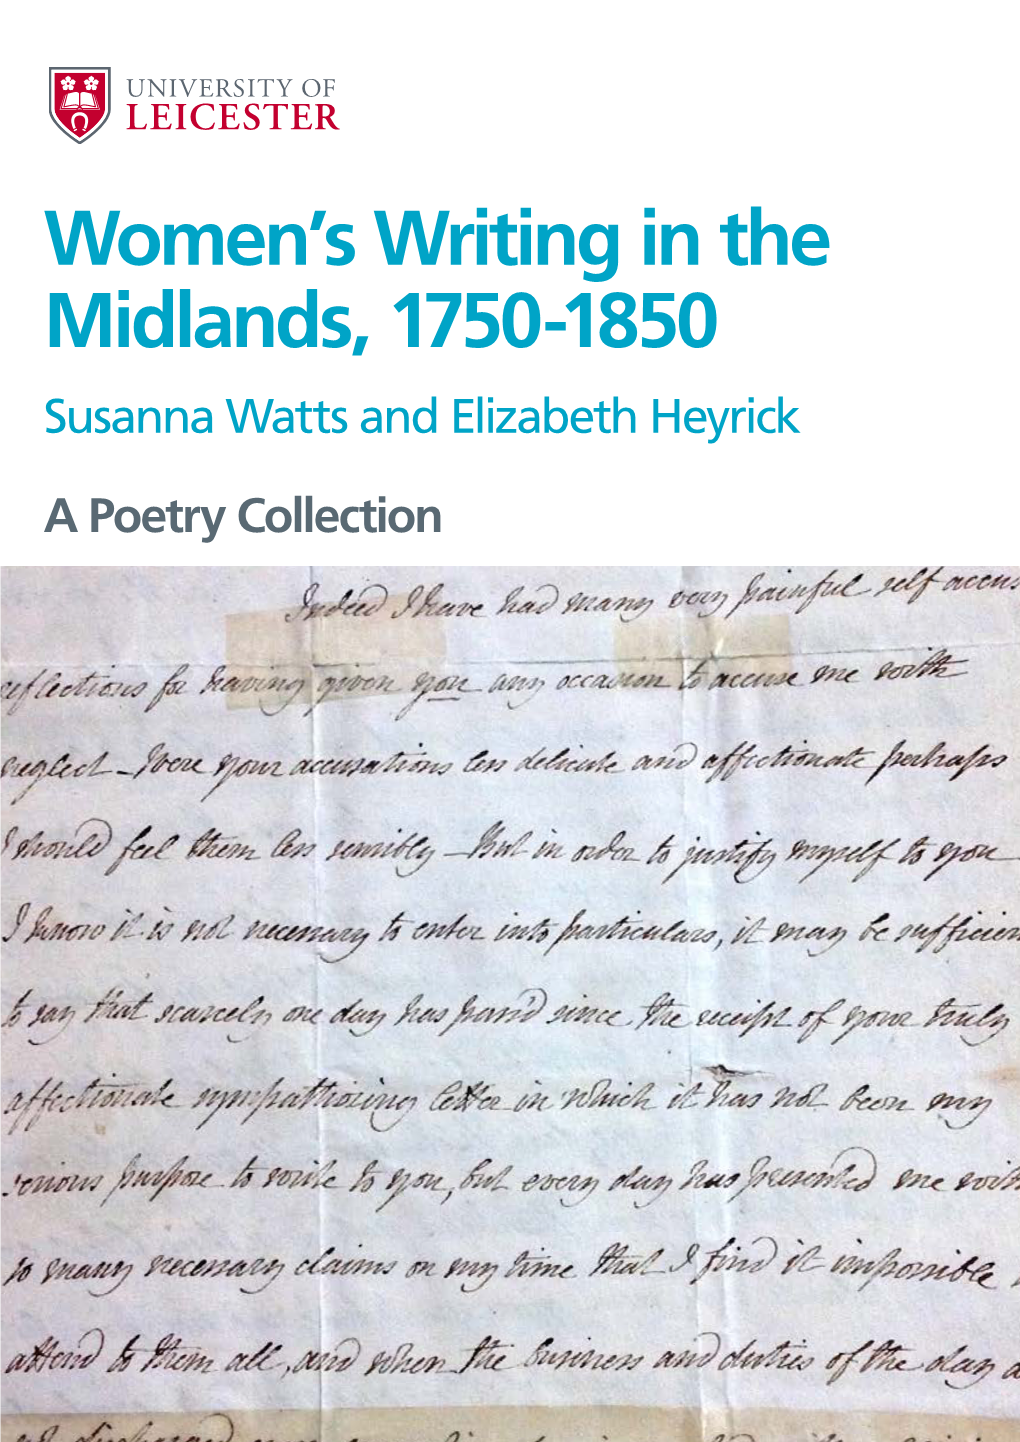 Women's Writing in the Midlands, 1750-1850